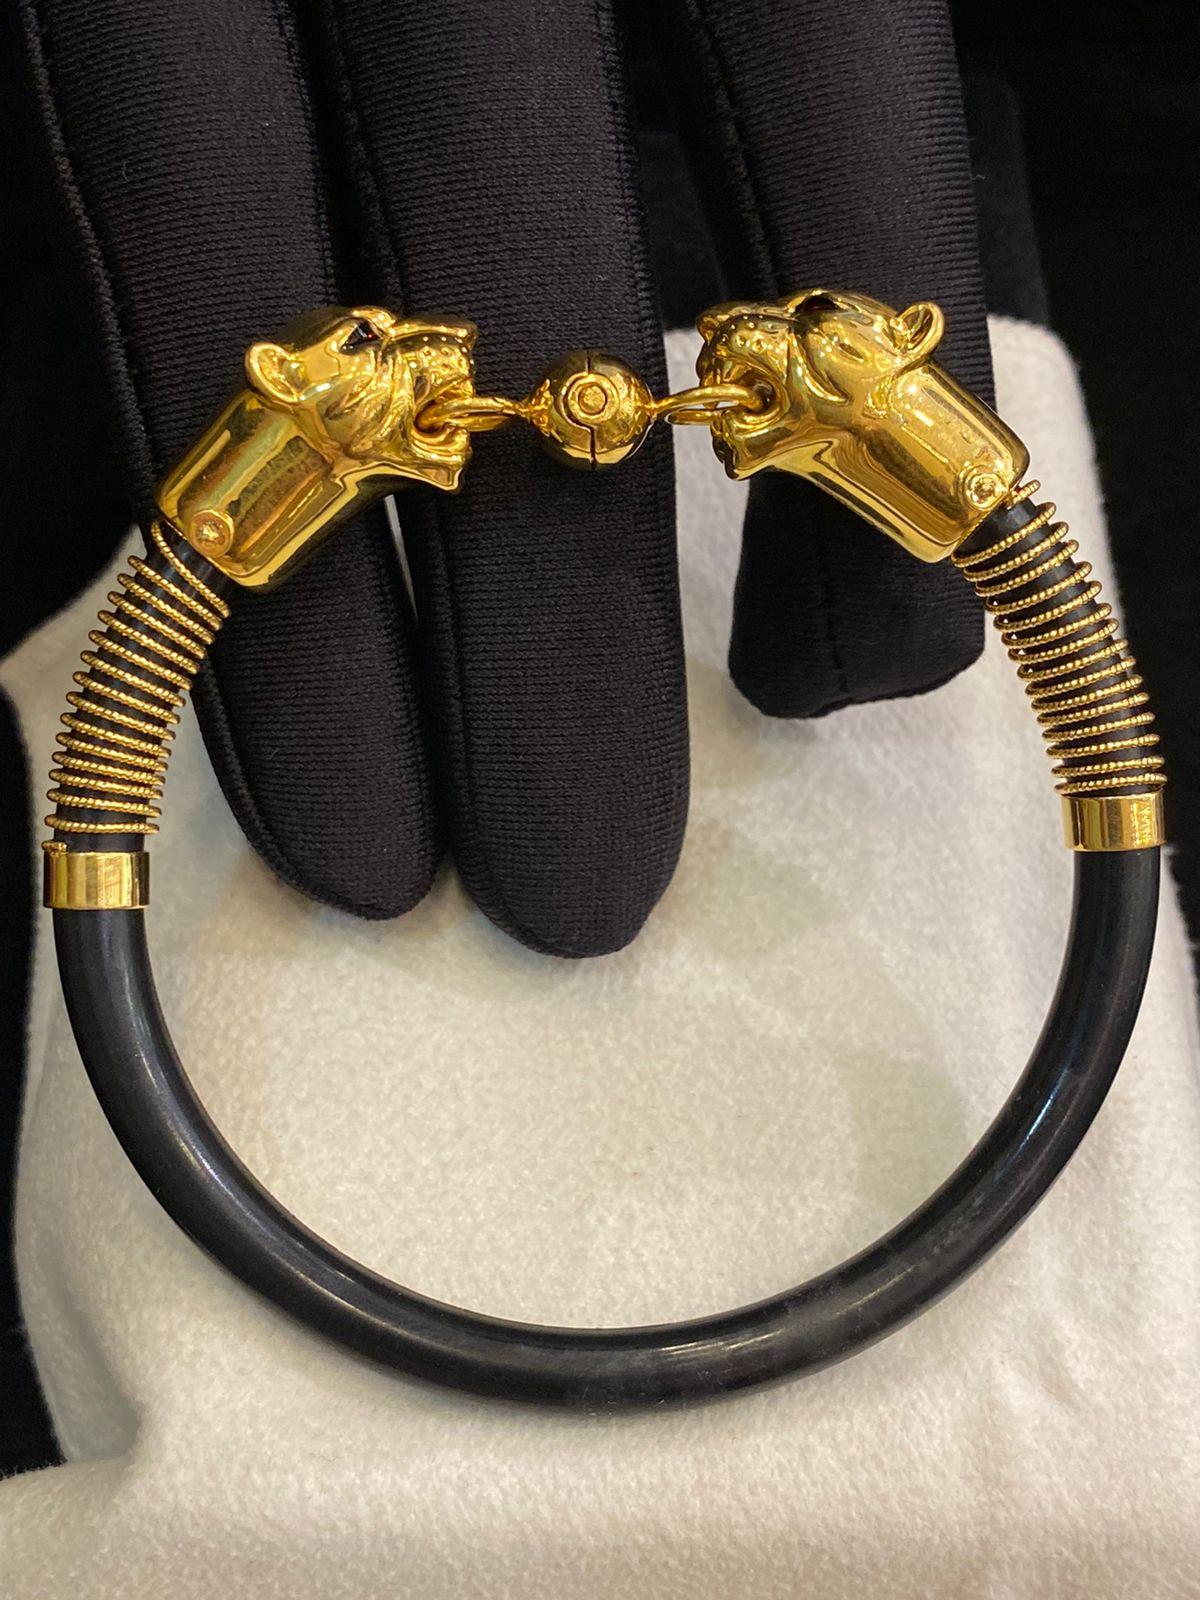 Exclusive panther bracelet in 22k gold and leather. Handmade Jewels. Top quality.